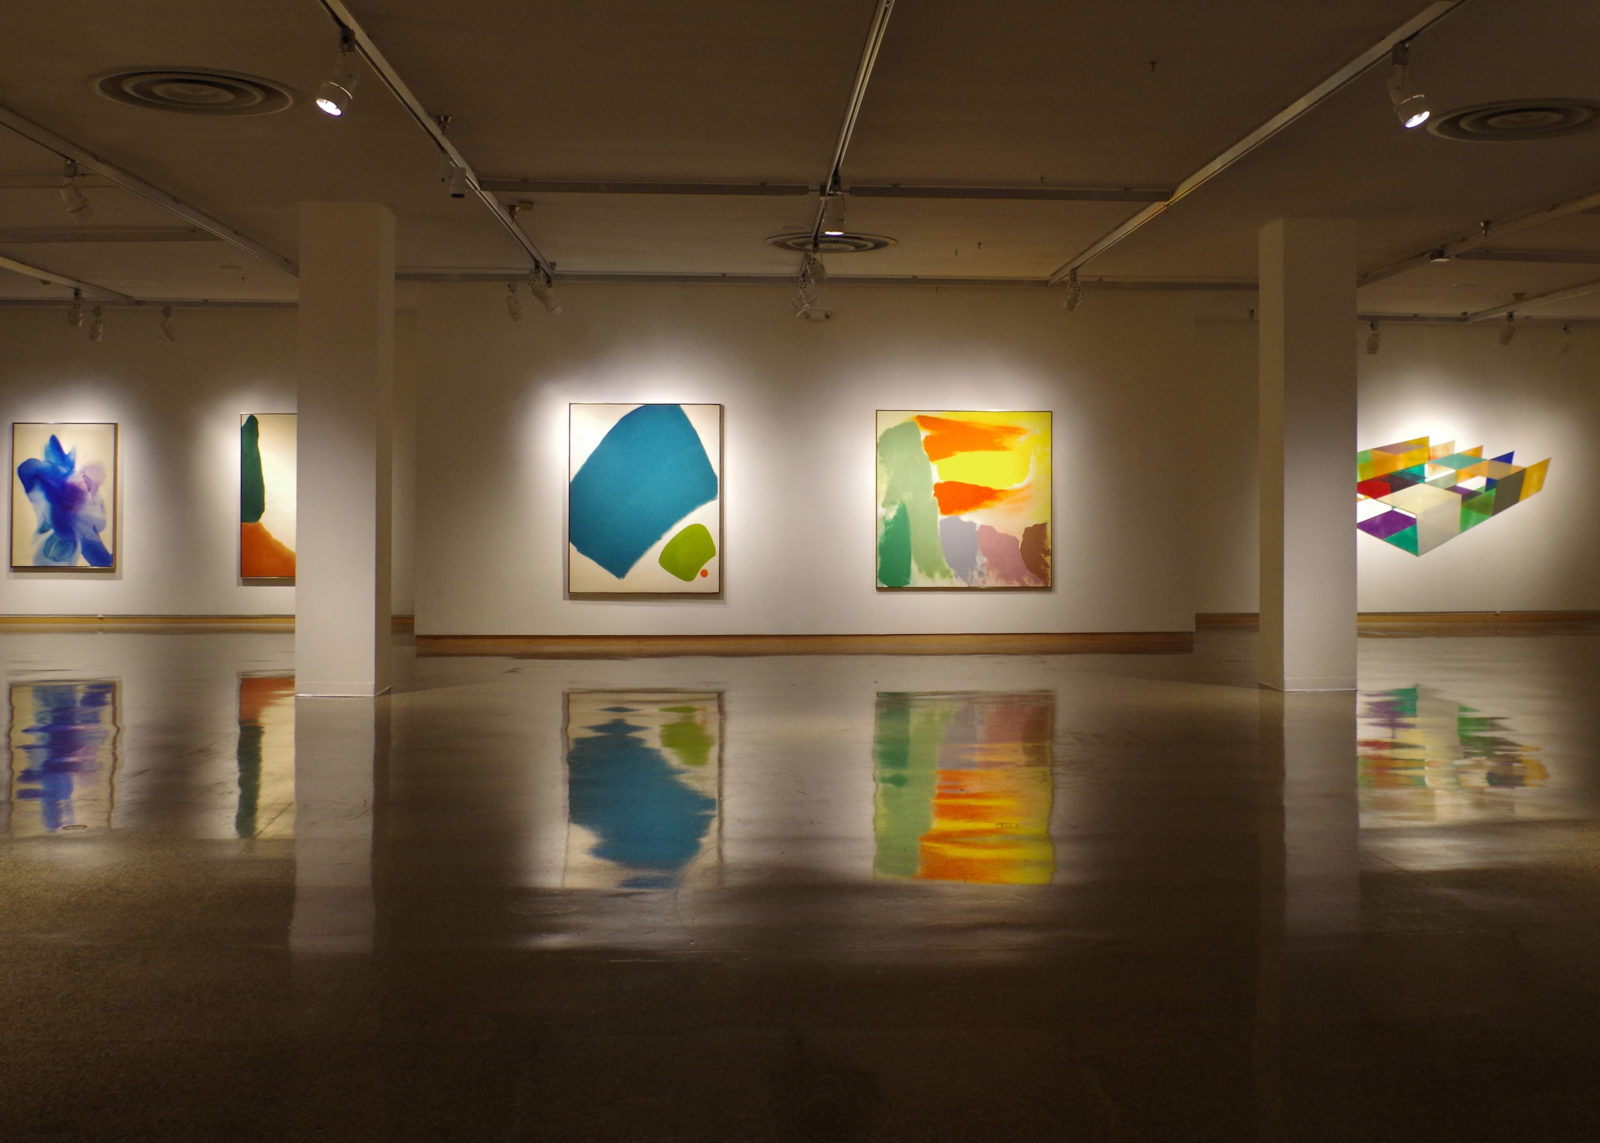 A gallery interior with abstract art installed, lit by spotlights.